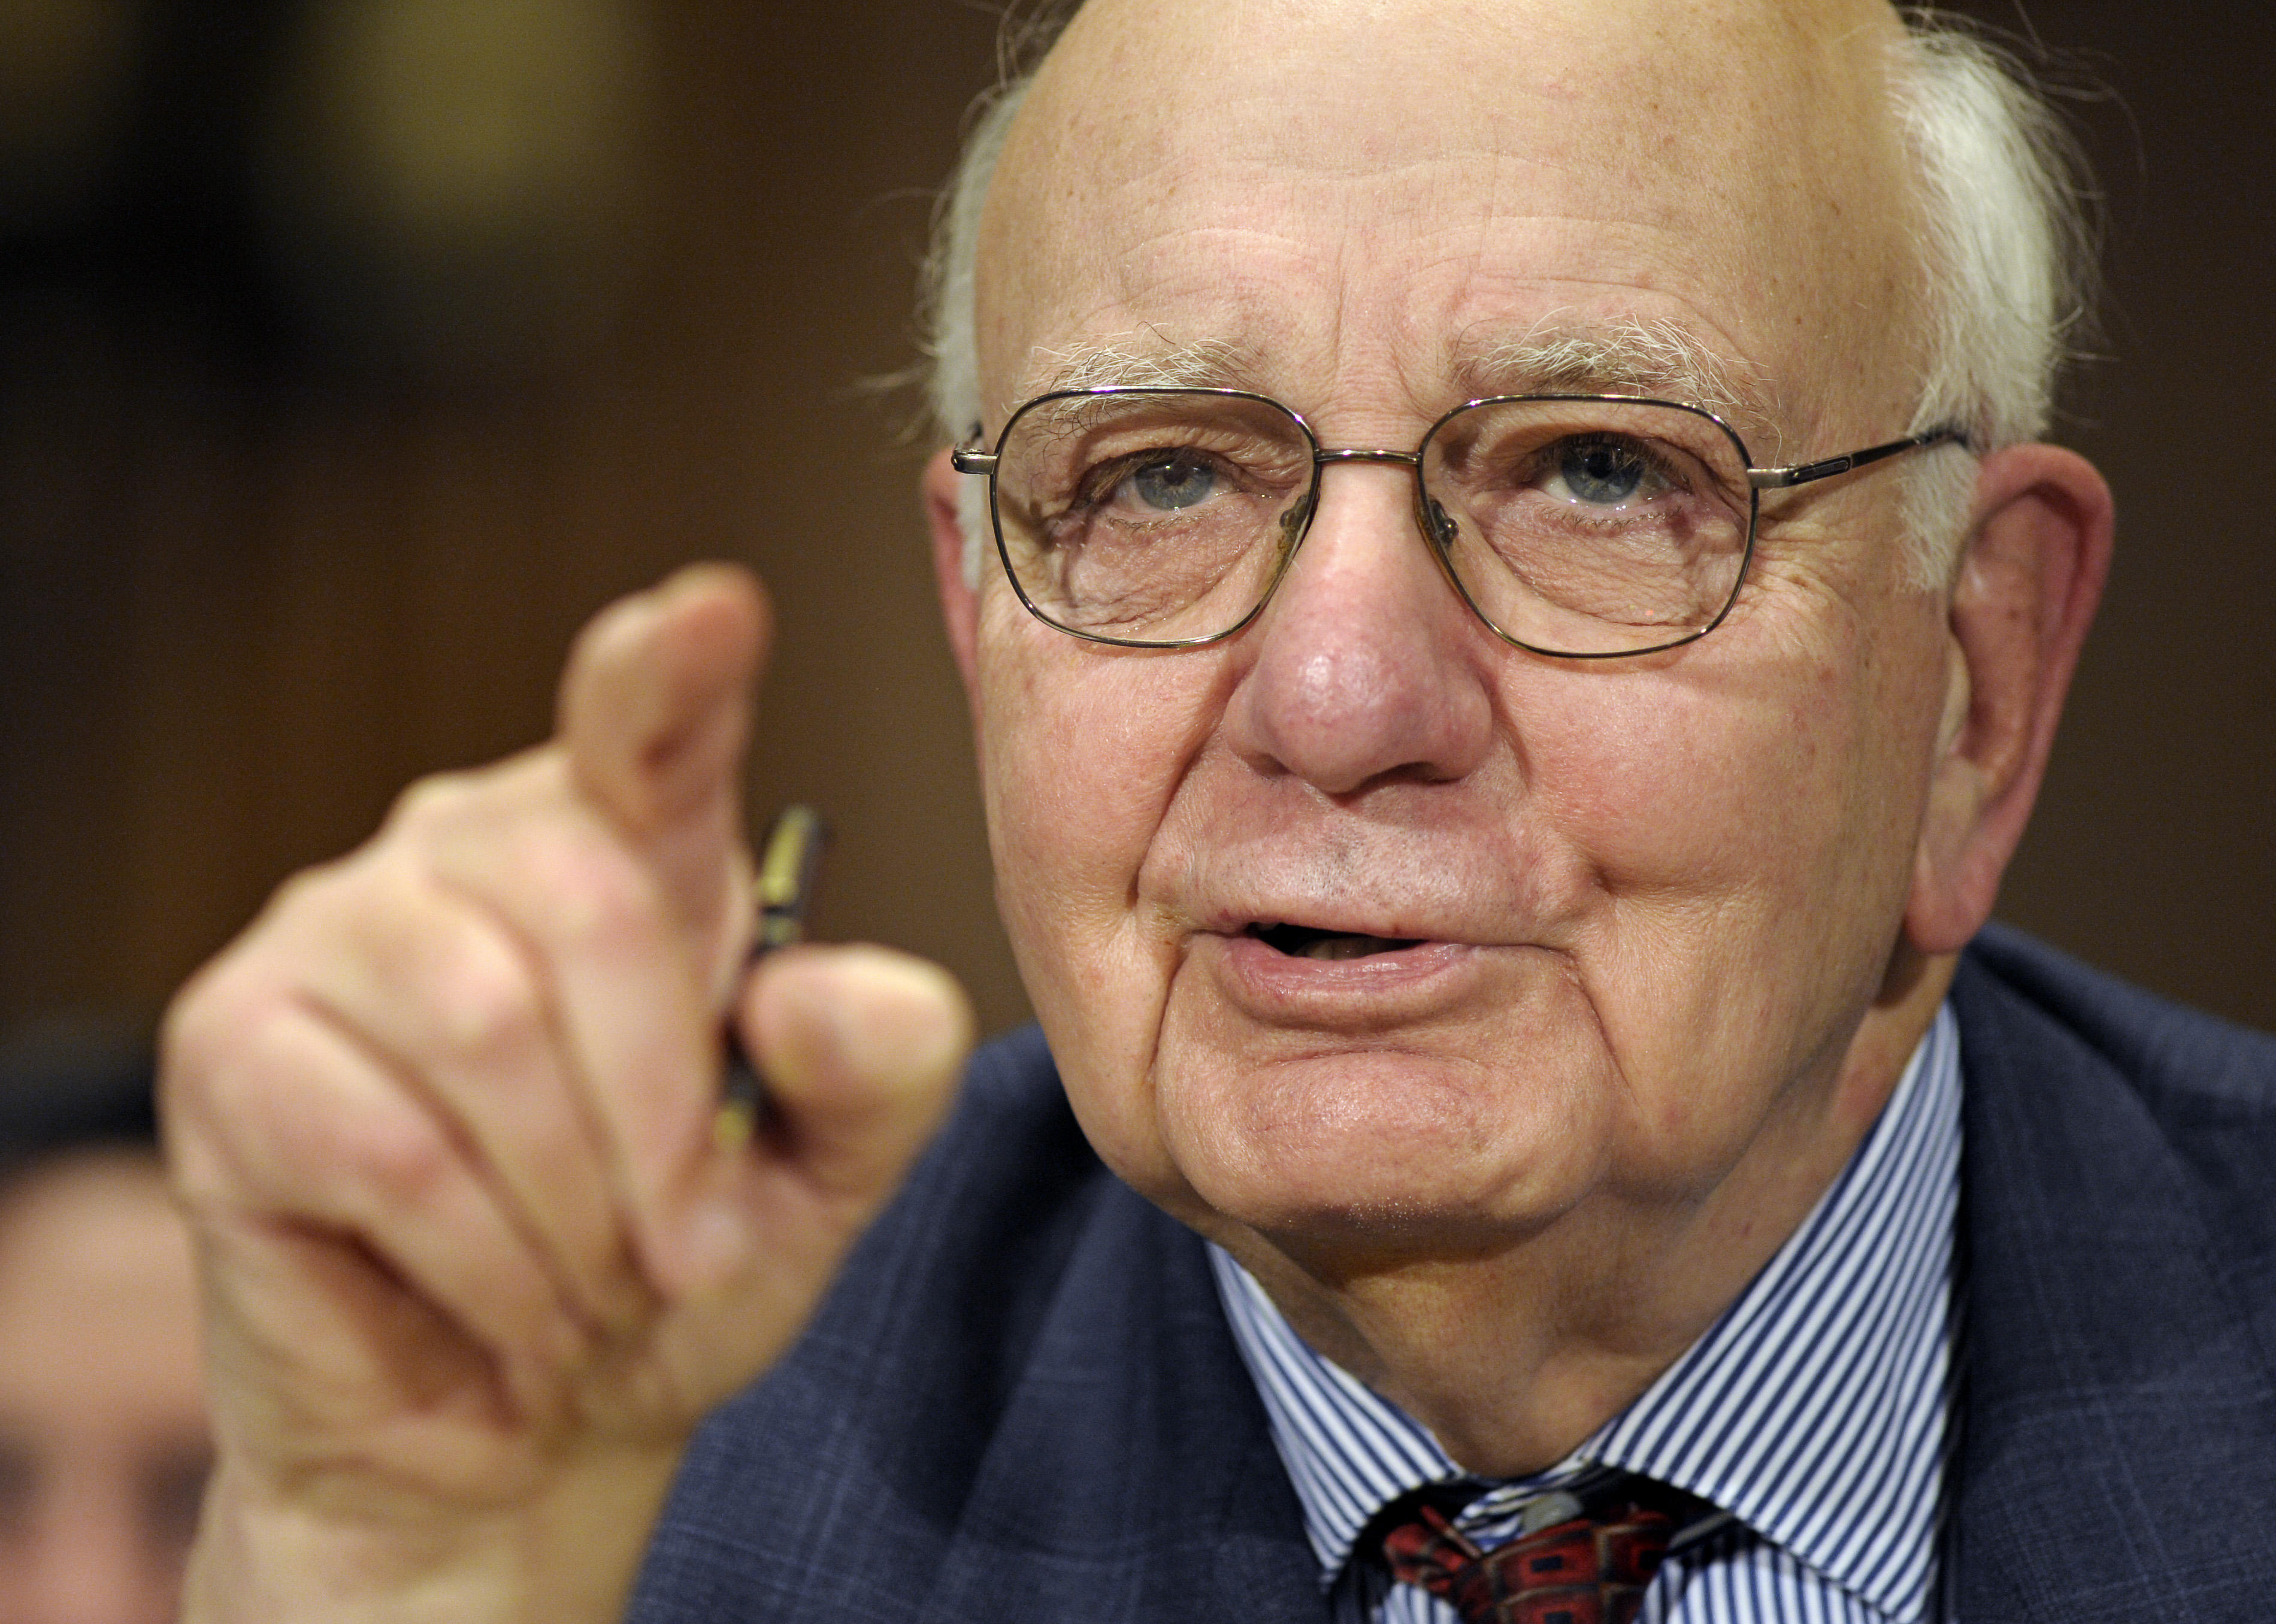 Don’t Get Too Excited About the Volcker Rule